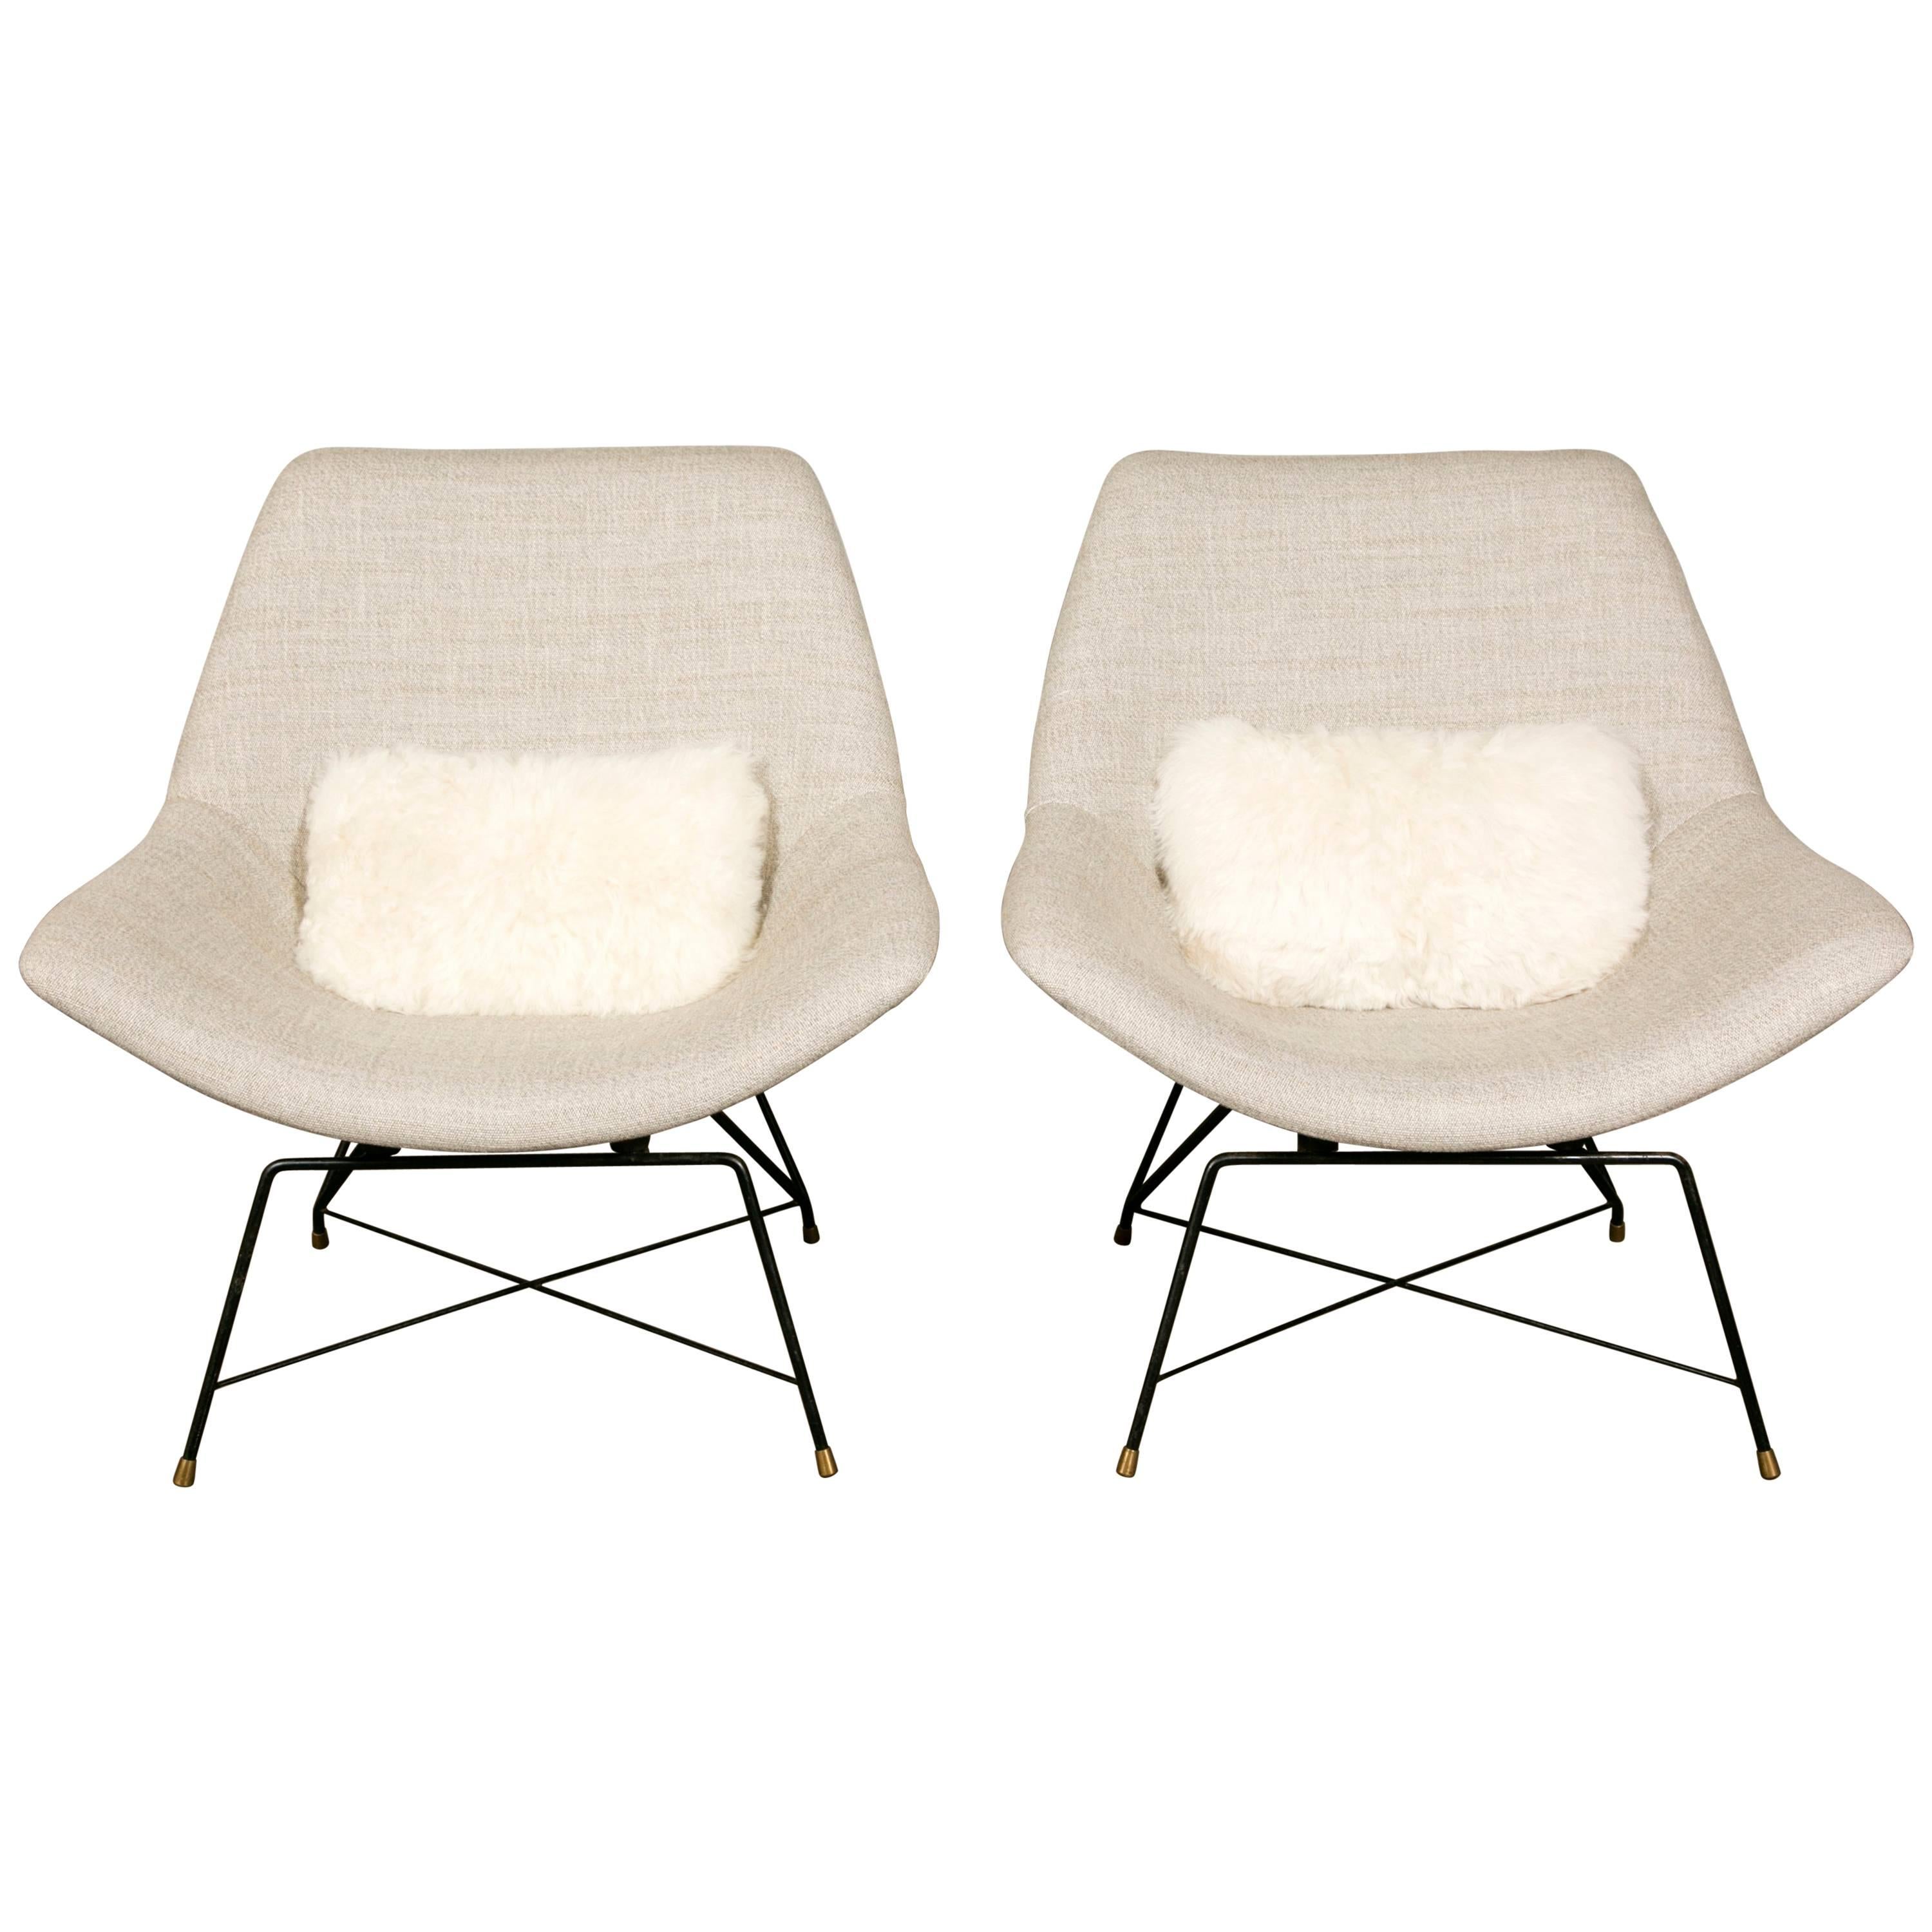 Pair of Kosmos Lounge Chairs, Designed by Augusto Bozzi